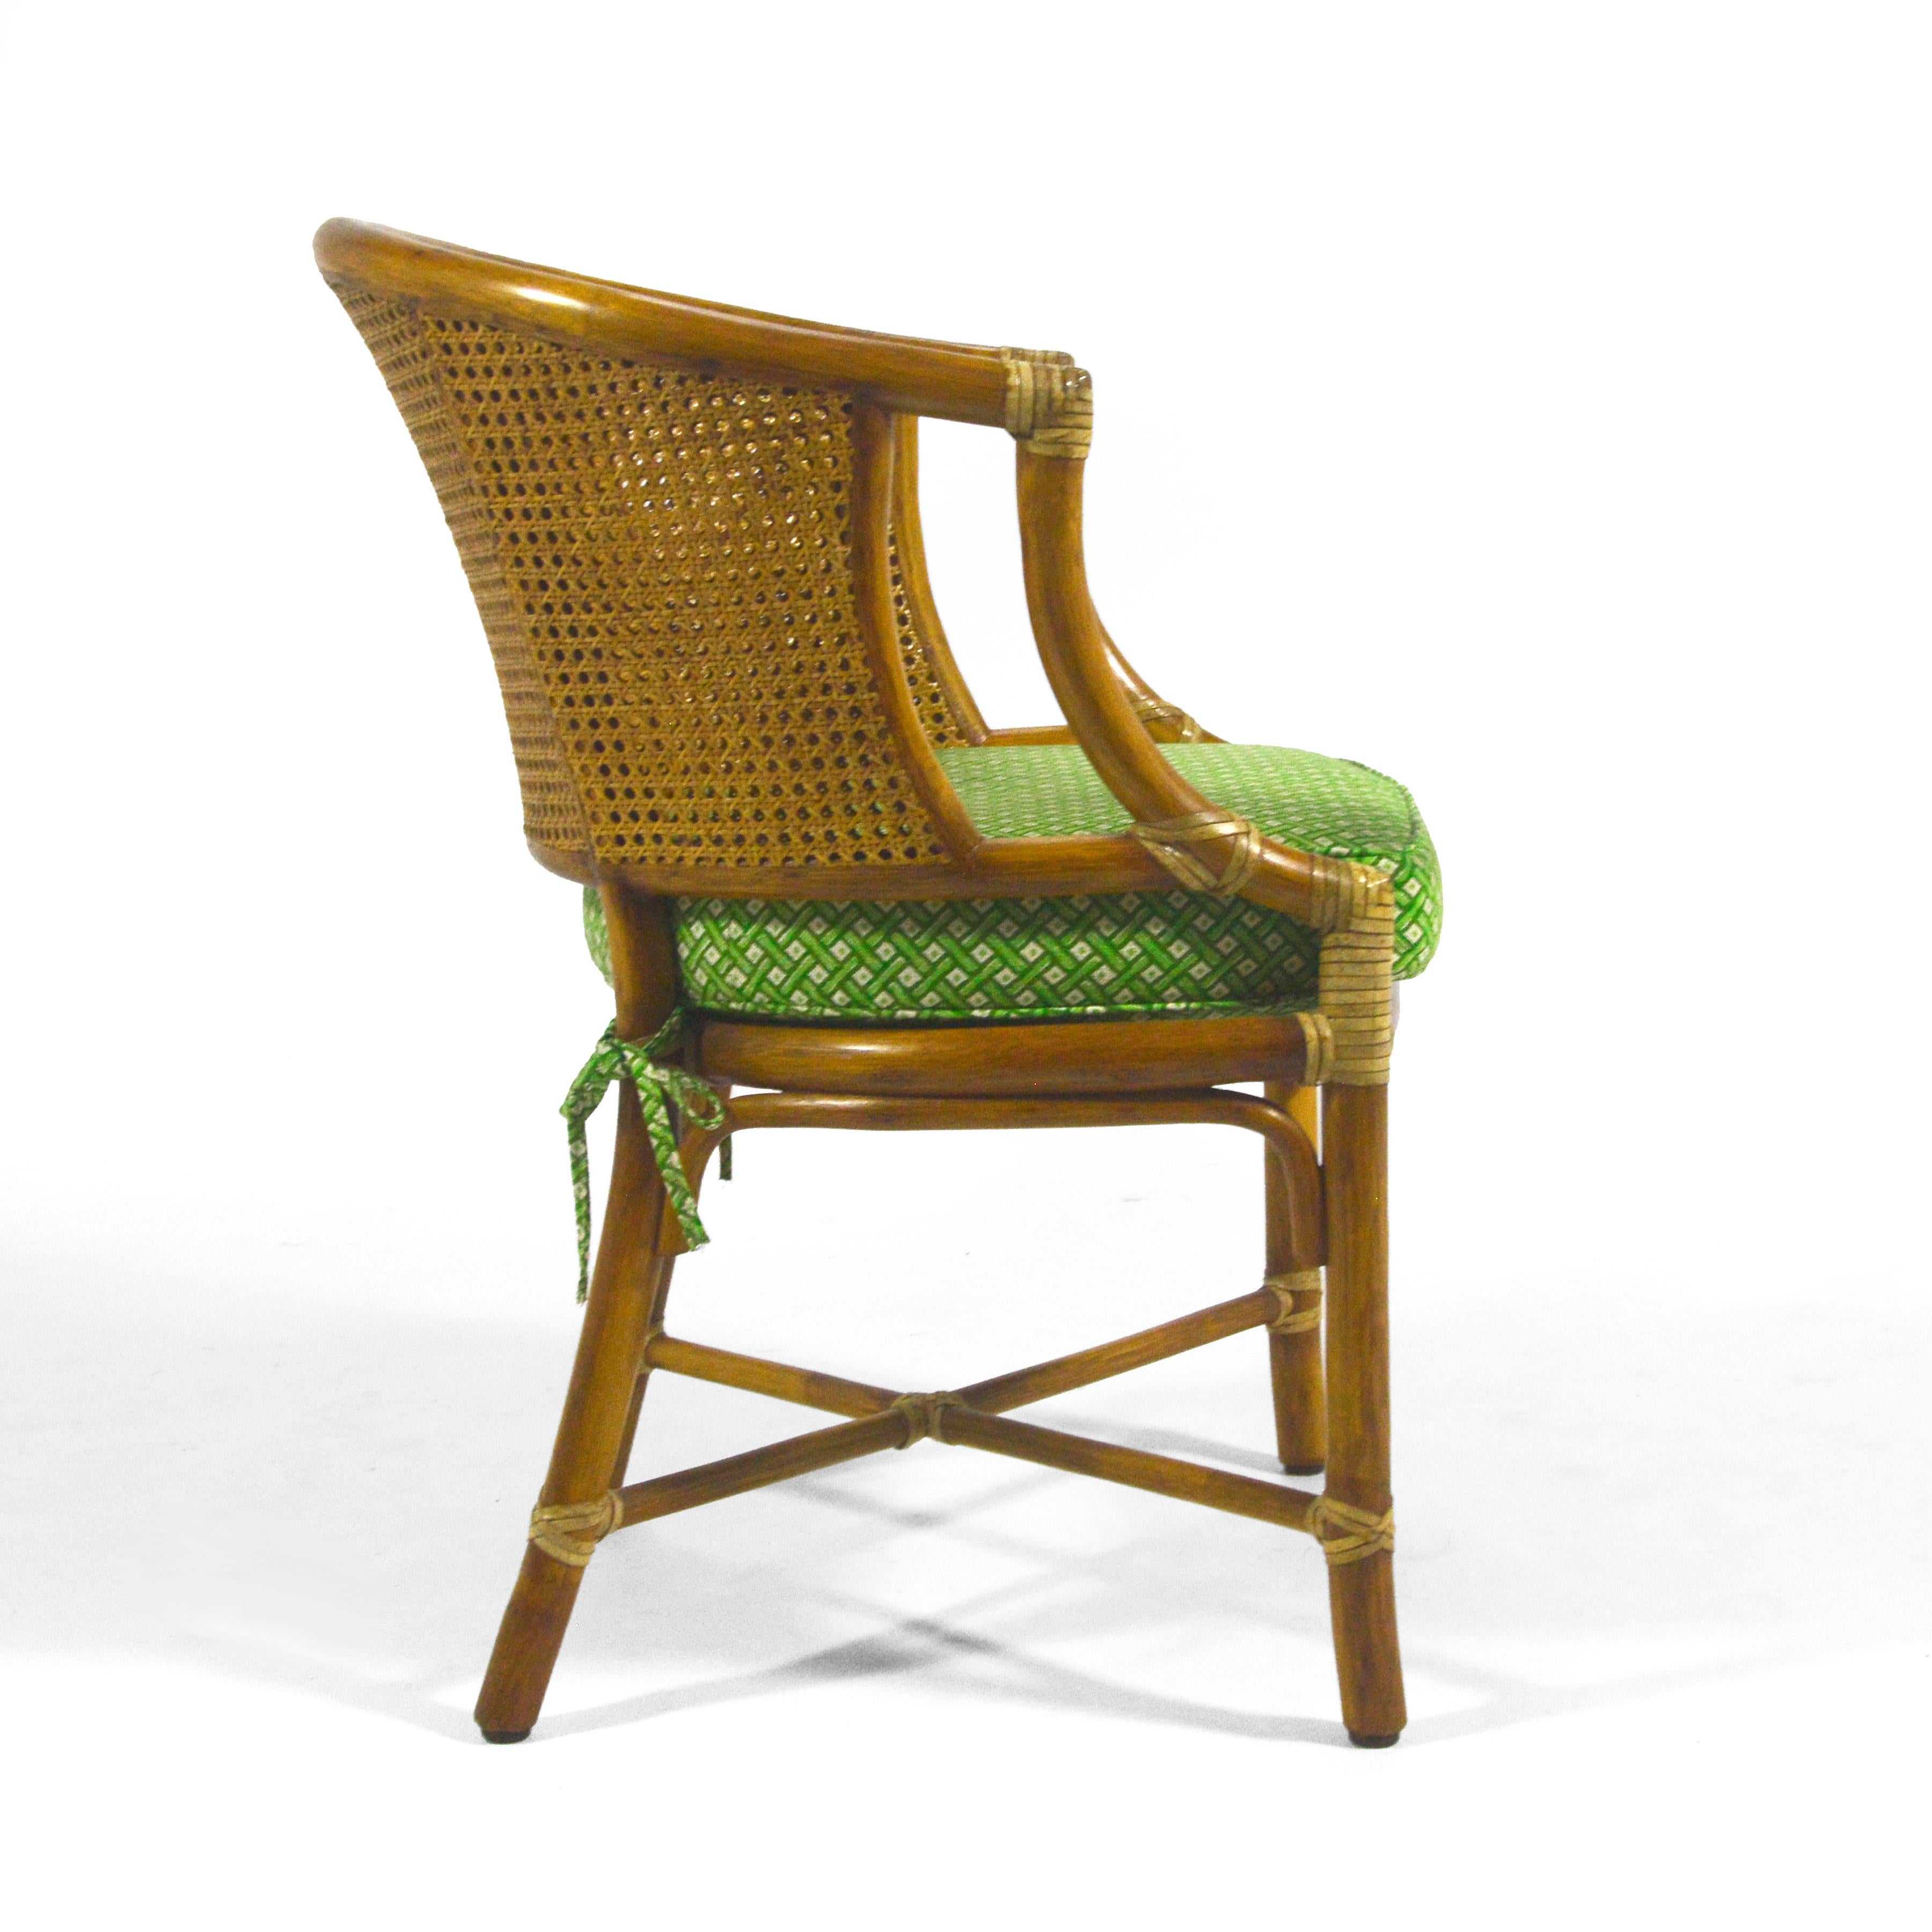 Elinor McGuire M-86 Rattan & Cane Chair In Good Condition For Sale In Highland, IN